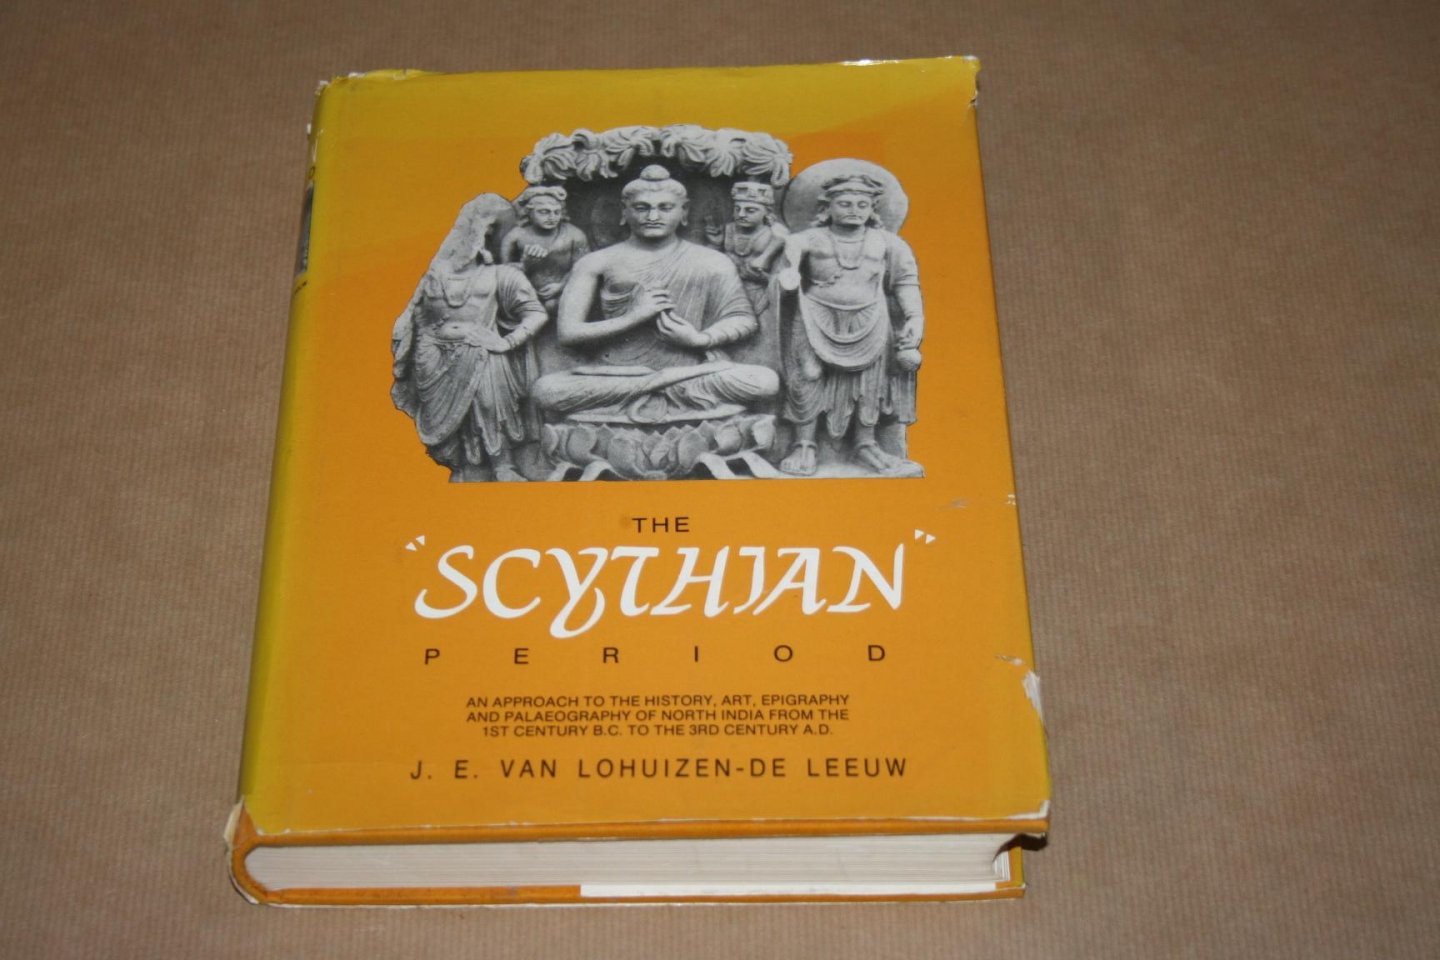 J.E. van Lohuizen-de Leeuw - The "Scythian" period -- An approach to the history, art, epigraphy and palaeography of North India, from the 1st century b.c. to the 3rd century a.d.